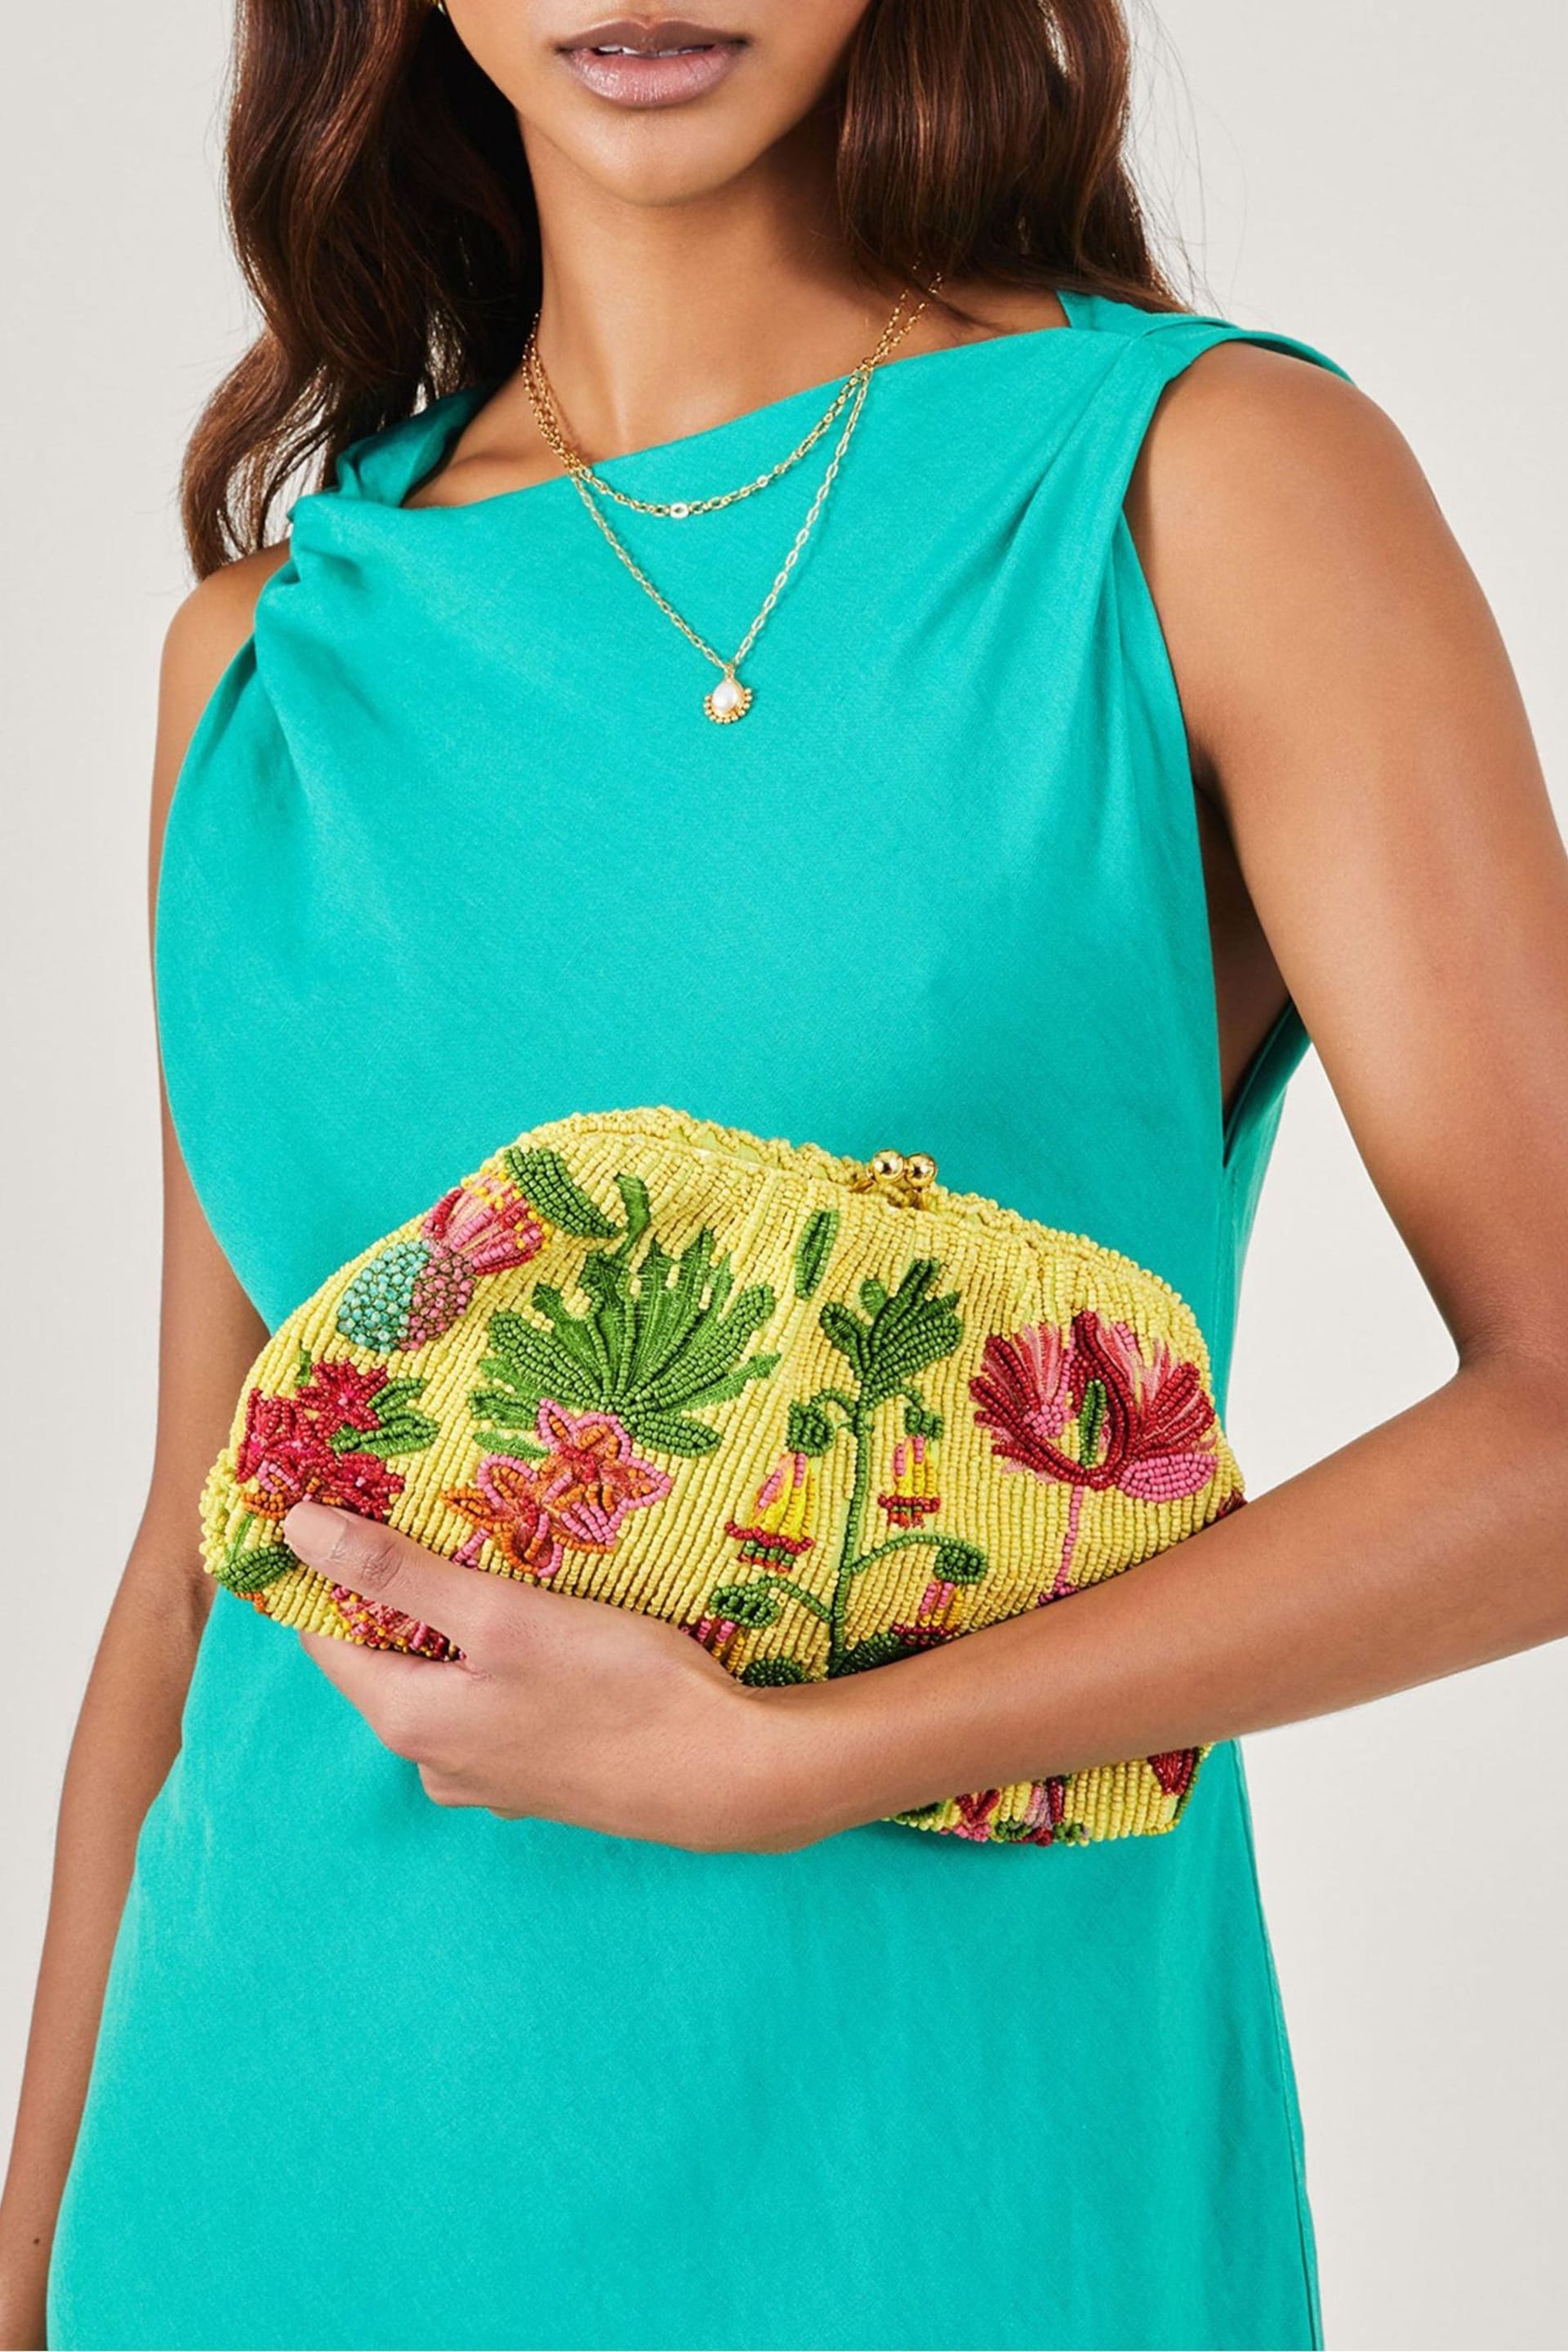 Accessorize Yellow Floral Beaded Clip Frame Bag - Image 1 of 3